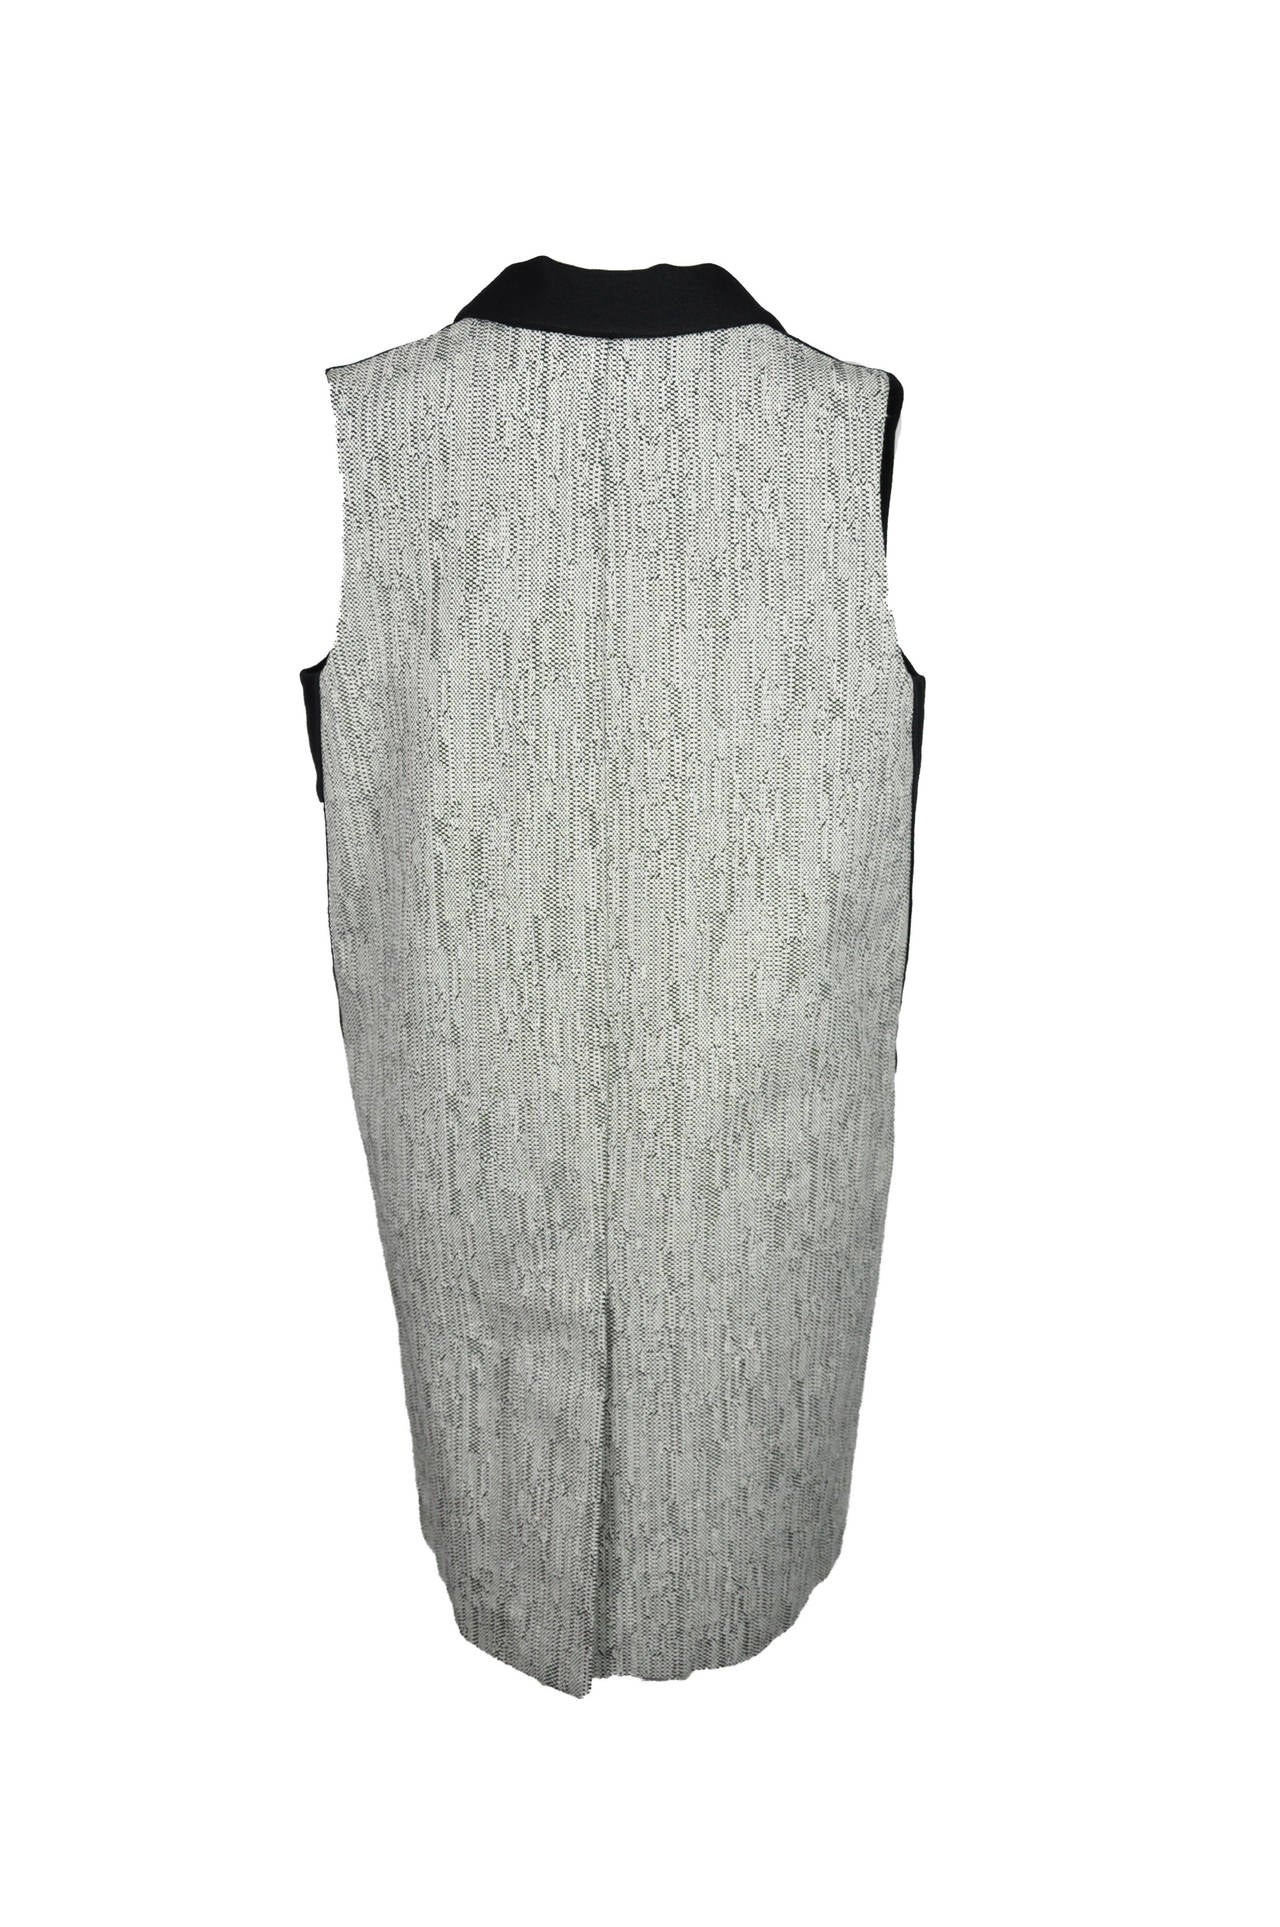 Fendi 2015 S/S Collection Orchid Jacquard Tweed Long Vest New In New Condition For Sale In Hong Kong, Hong Kong